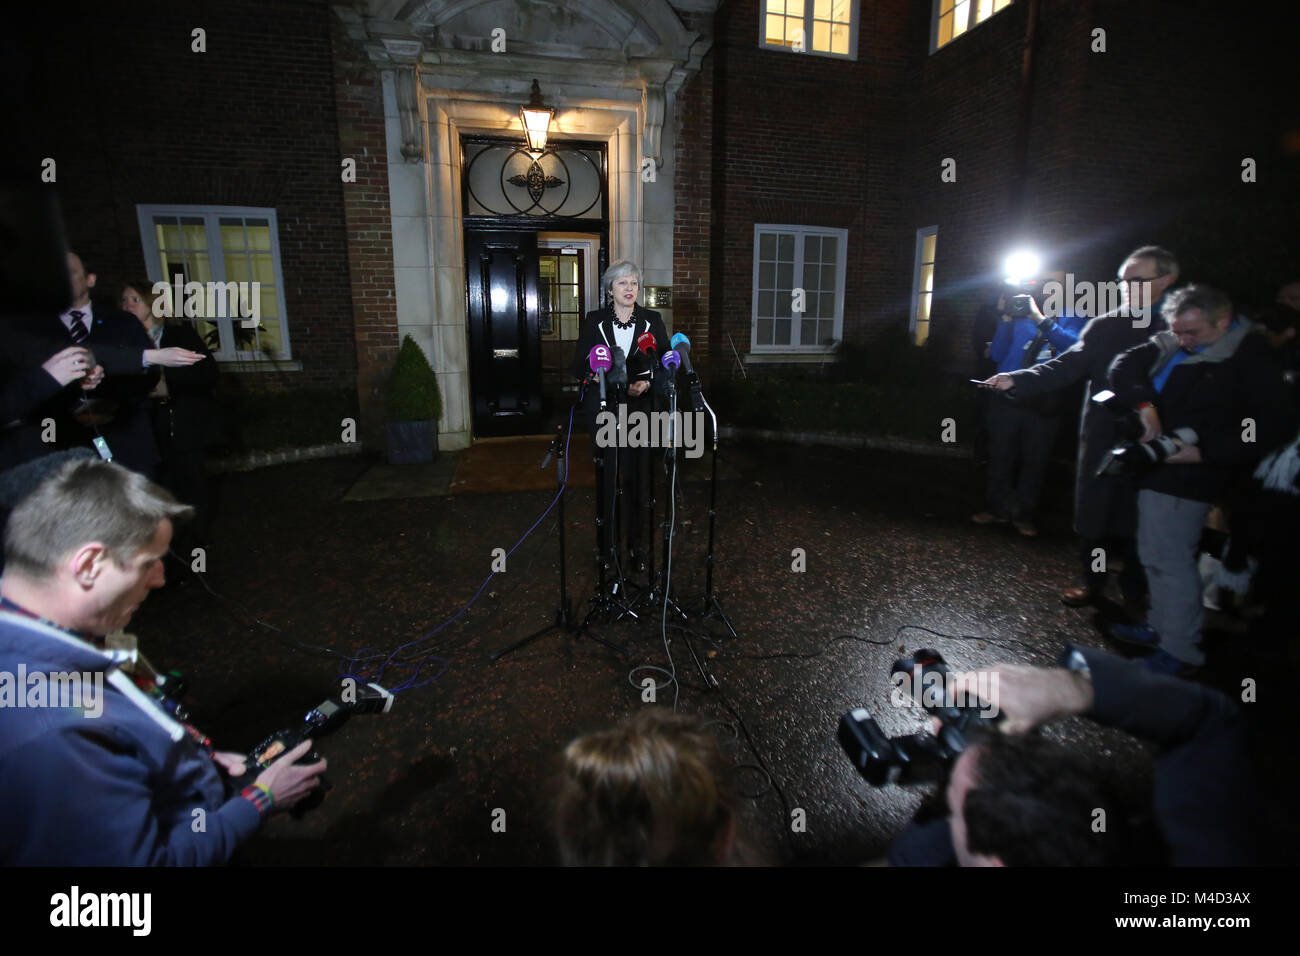 British Prime Minister Theresa May speaks to the media at Stormont,  Belfast, Monday, Feb 12th, 2018. Britain's Prime Minister Theresa May and Irish Prime Minister Leo Varadkar are to visit Belfast later for talks with the Stormont parties. The Prime Ministers left without a deal to restore devolved government. Stock Photo